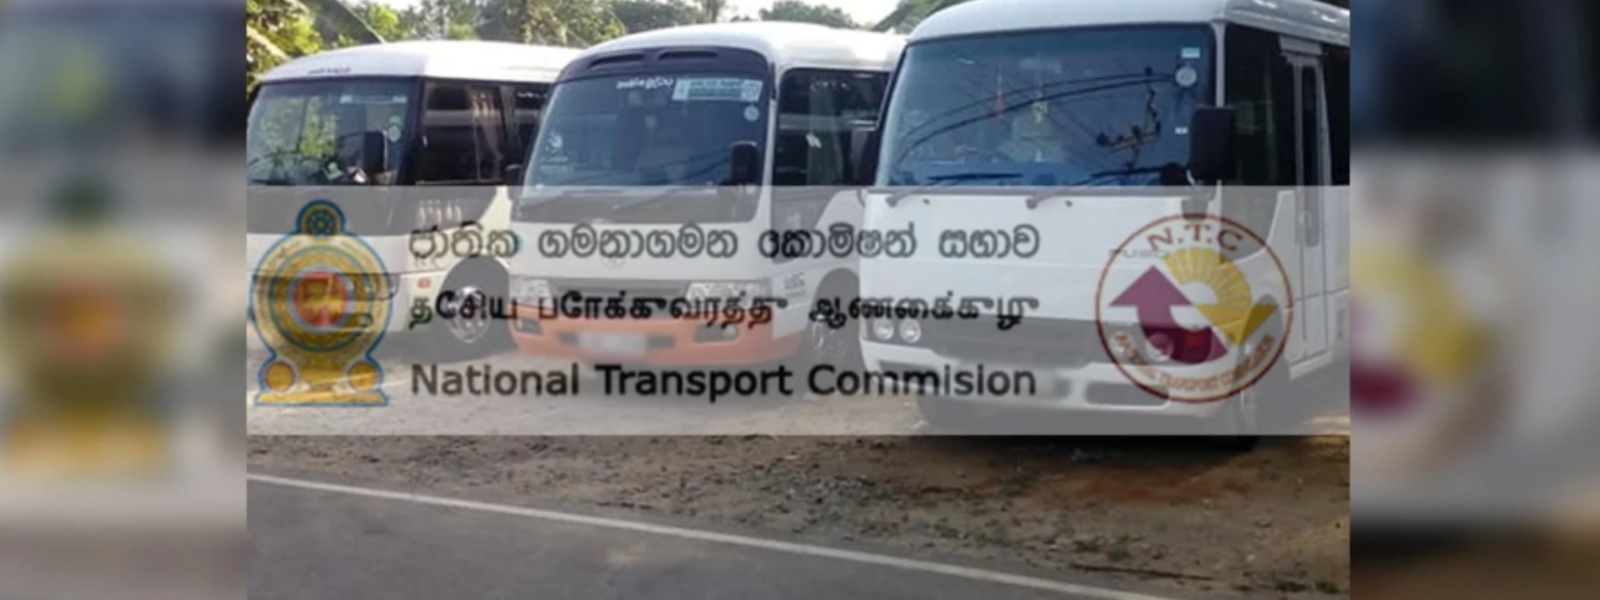 NTC to introduce e-cards replacing bus tickets